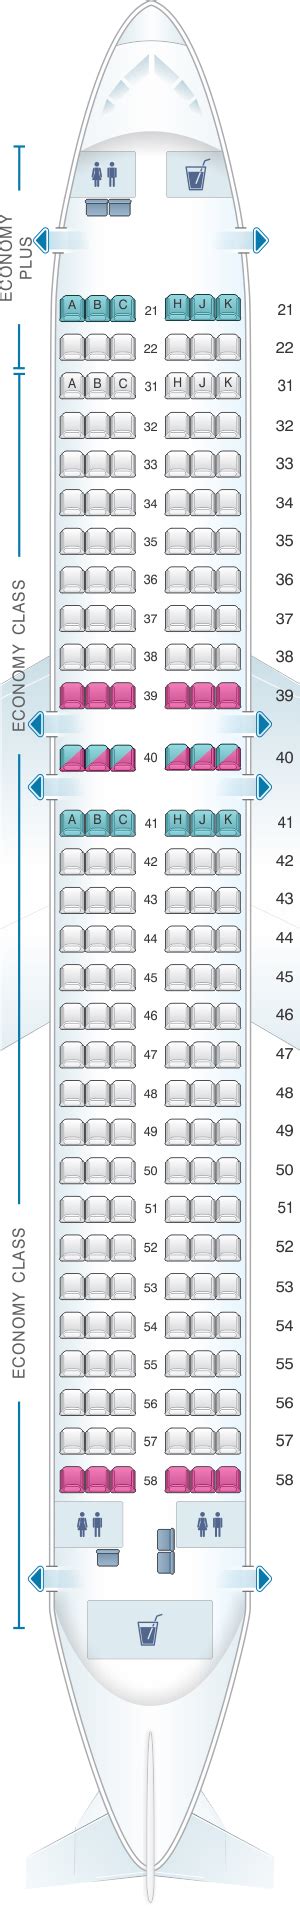 Philippine Airlines PAL Airbus A320 Seat Map Updated Find The Best